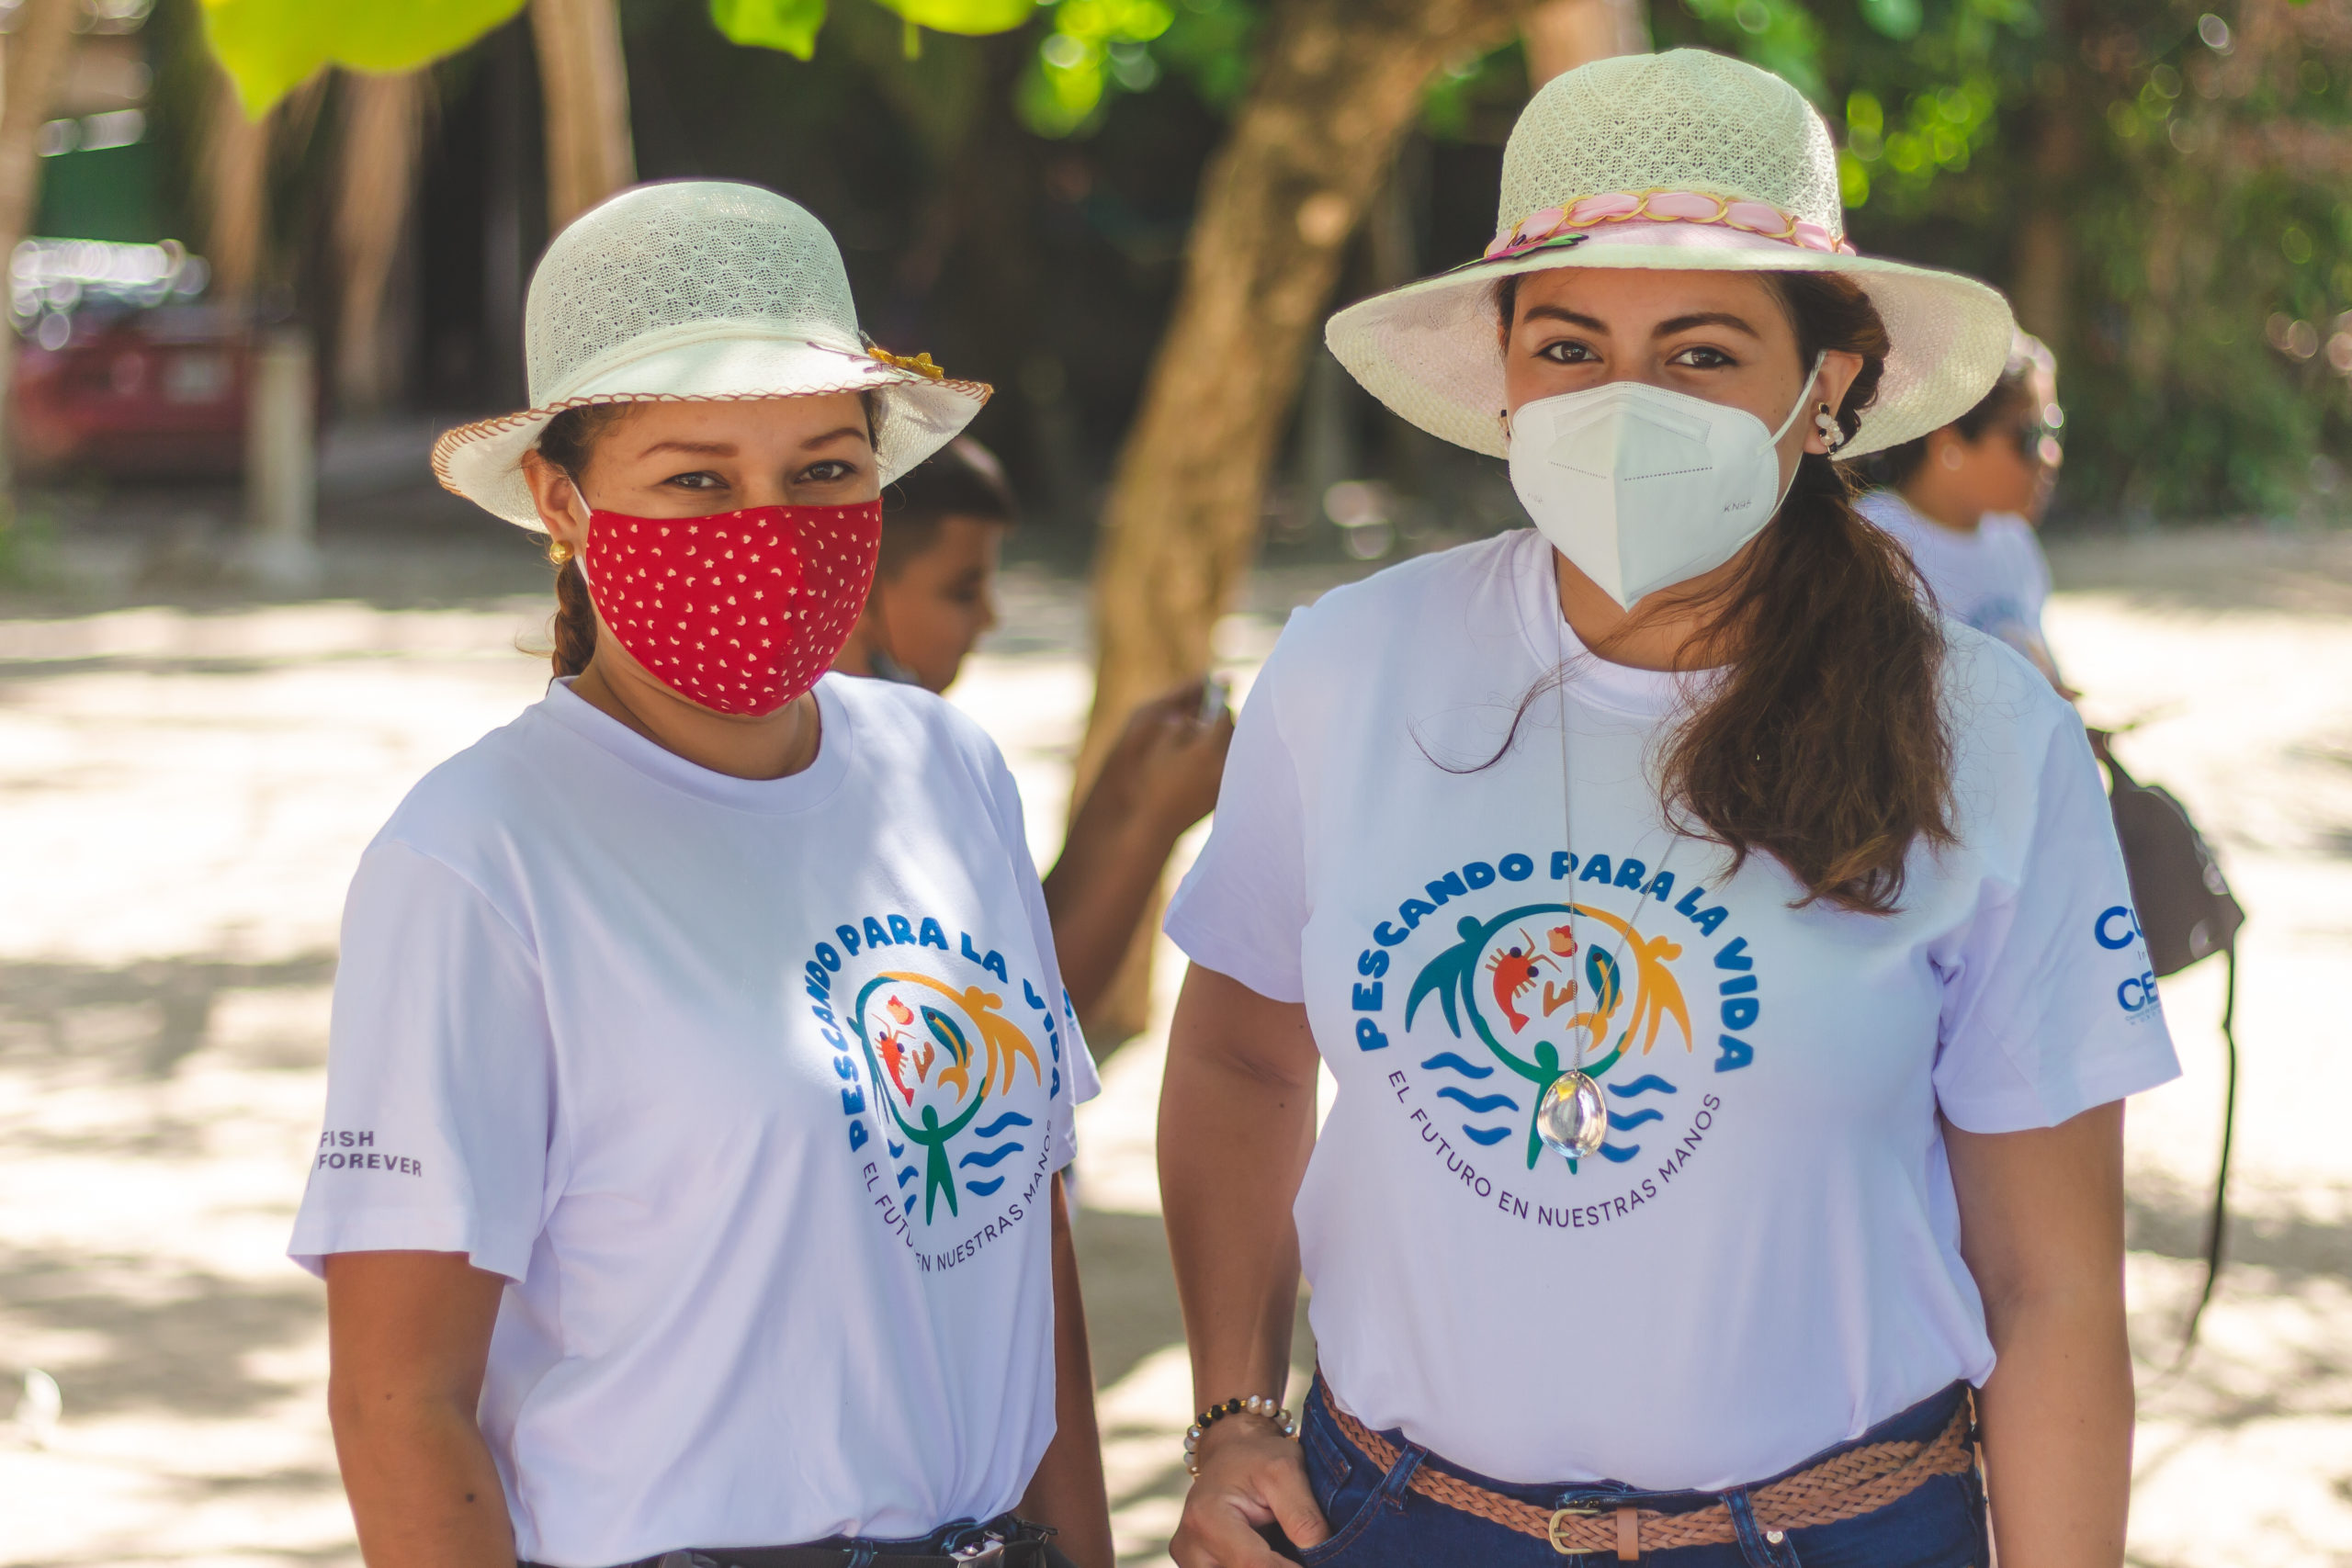  Fisher Lucrecia Padilla (left) and Joise Gonzales, in
Omoa, Honduras. Photographer: Kevin Peña
